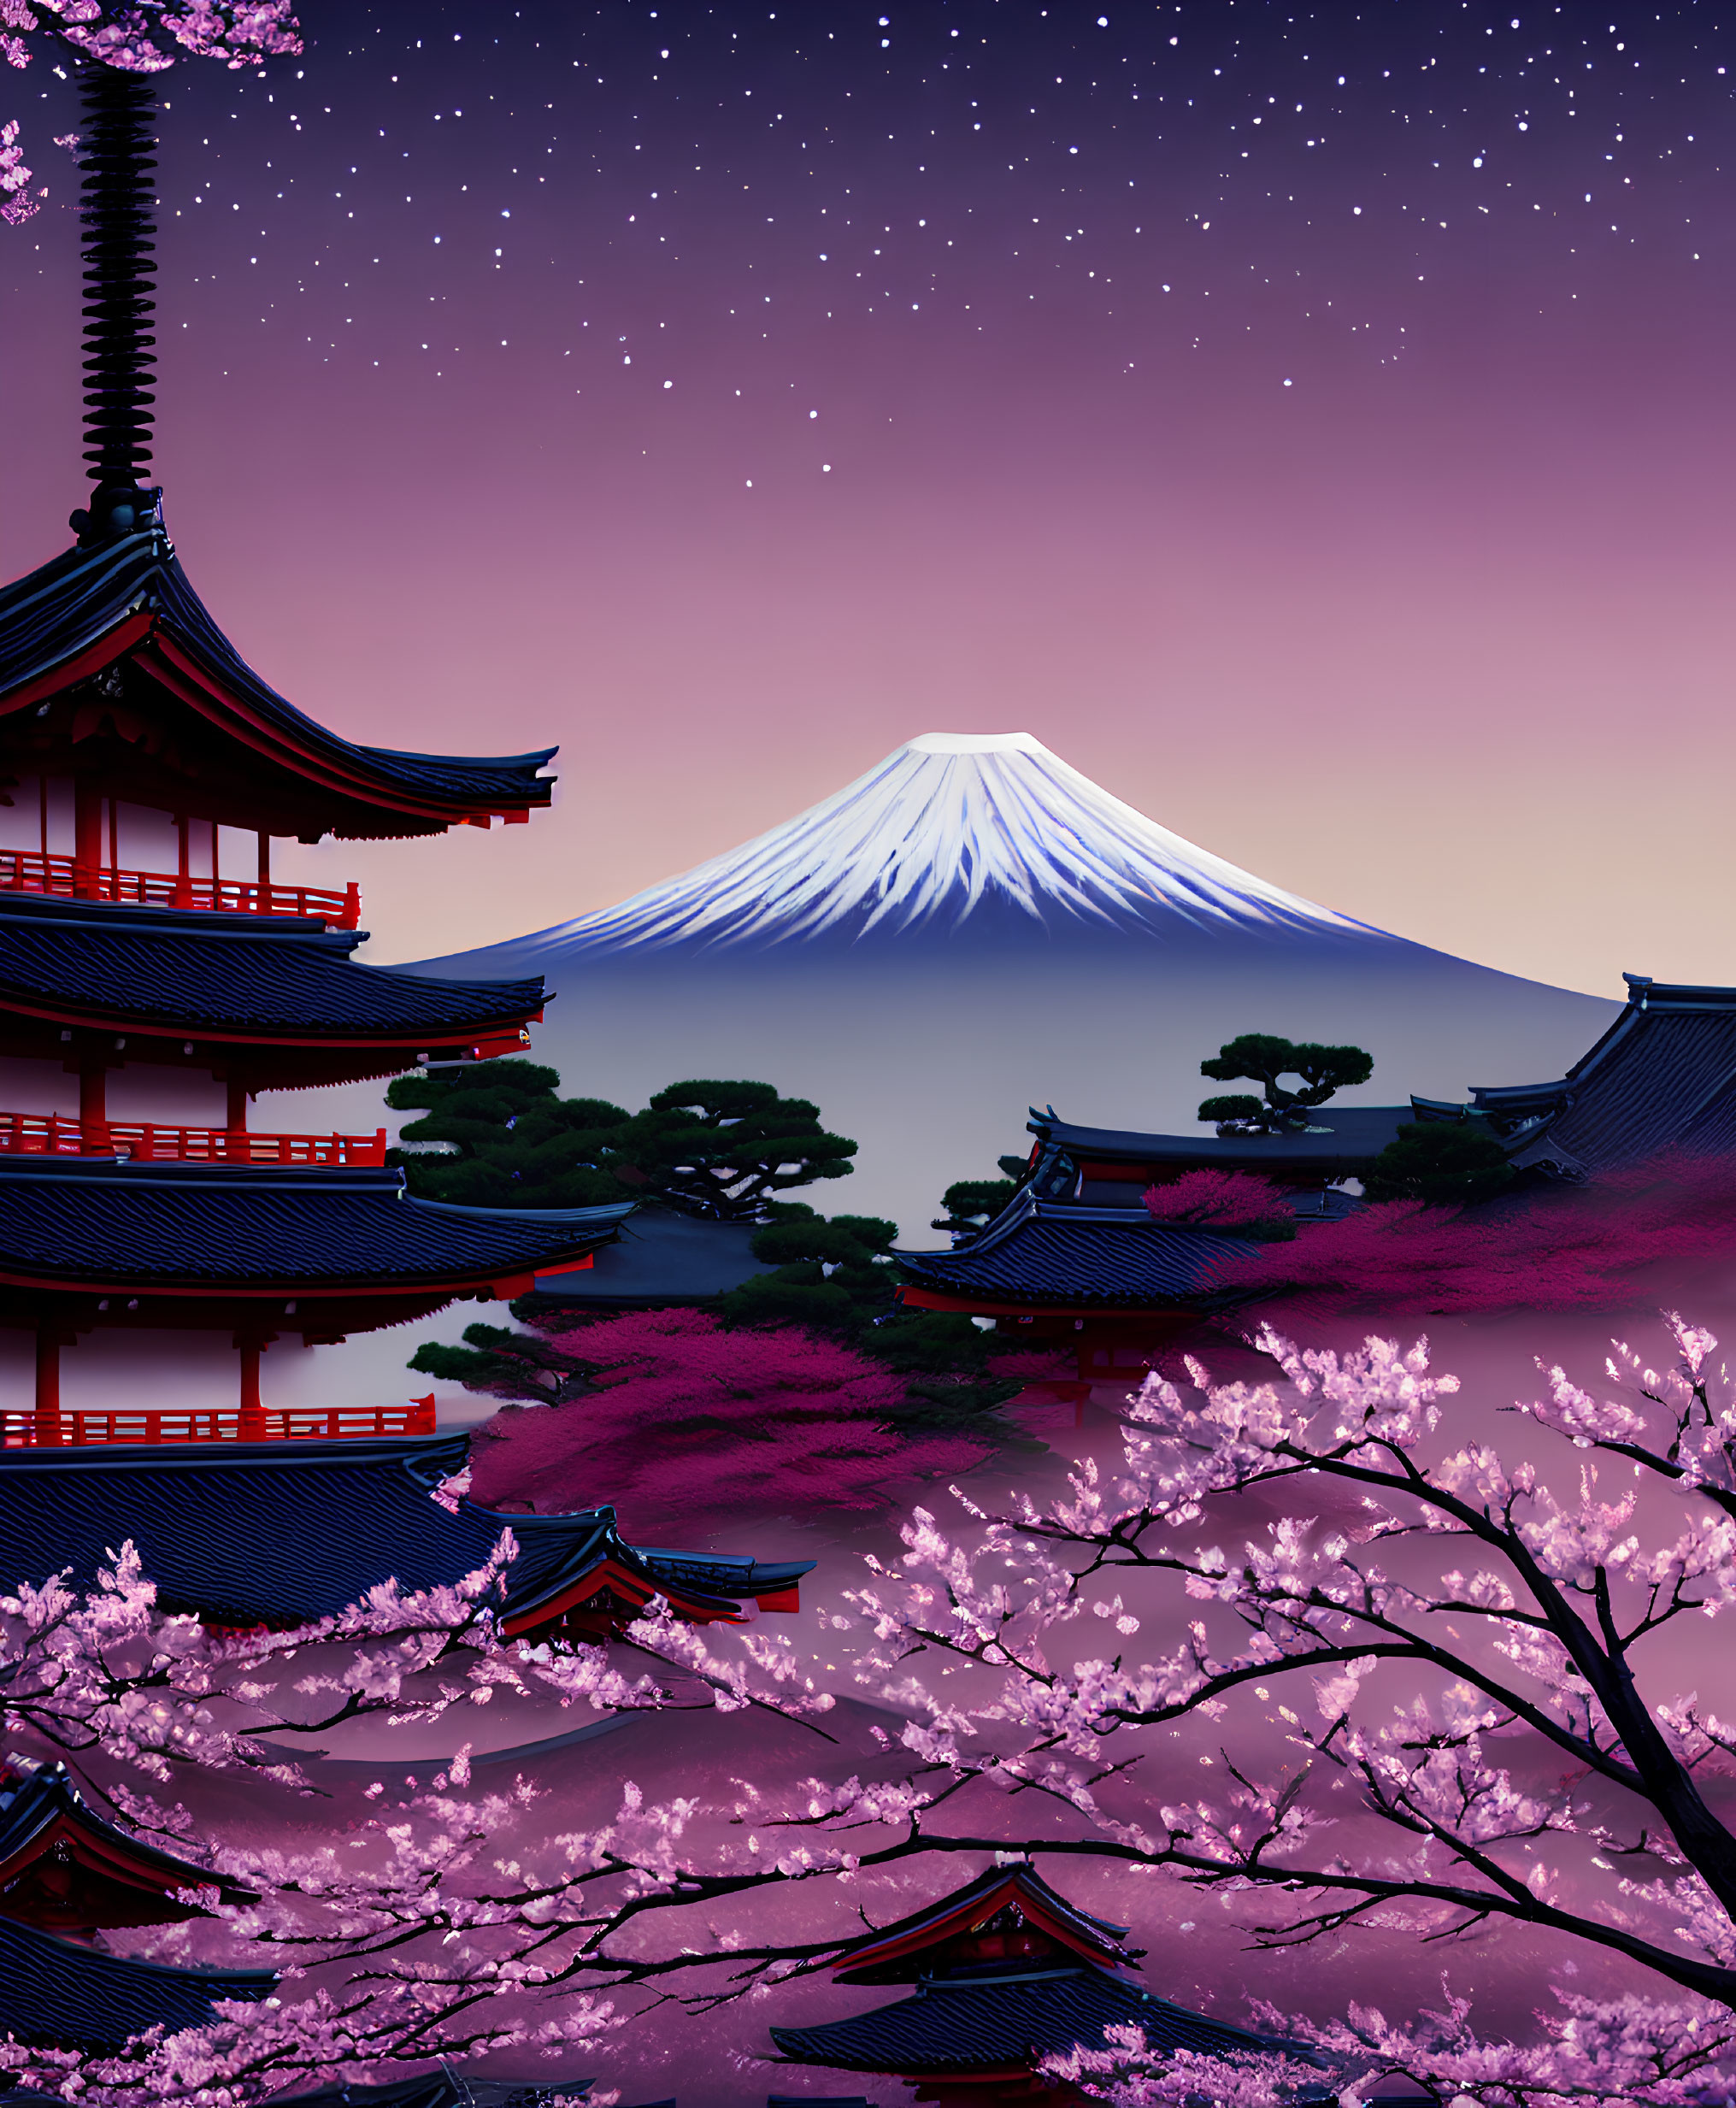 Traditional Japanese Pagoda with Cherry Blossoms, Mount Fuji, and Starry Night Sky